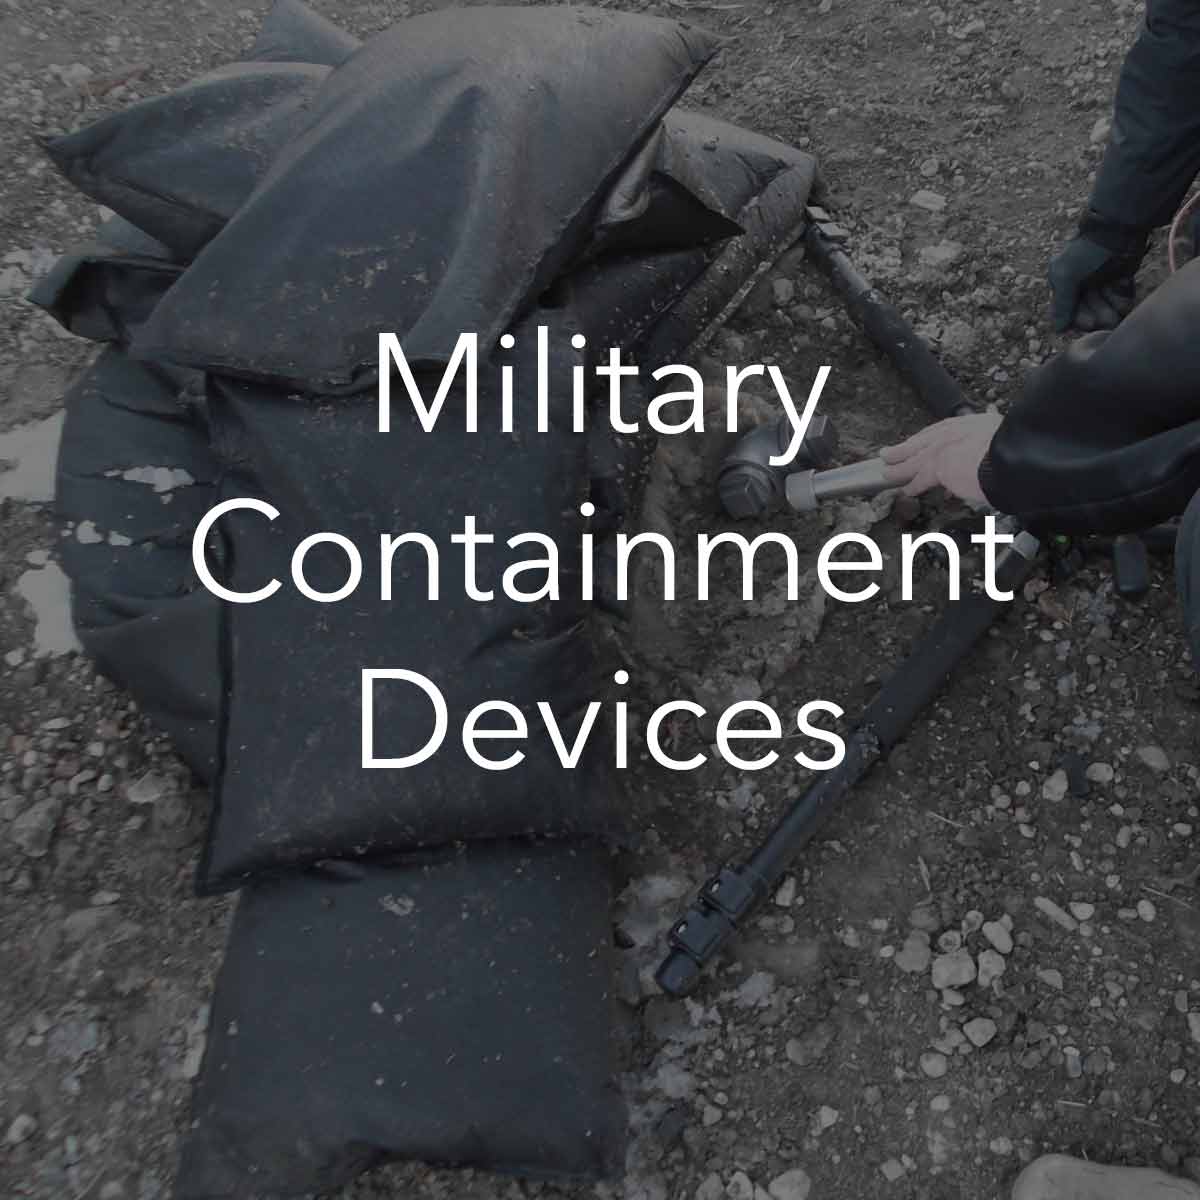 Military Containment Devices